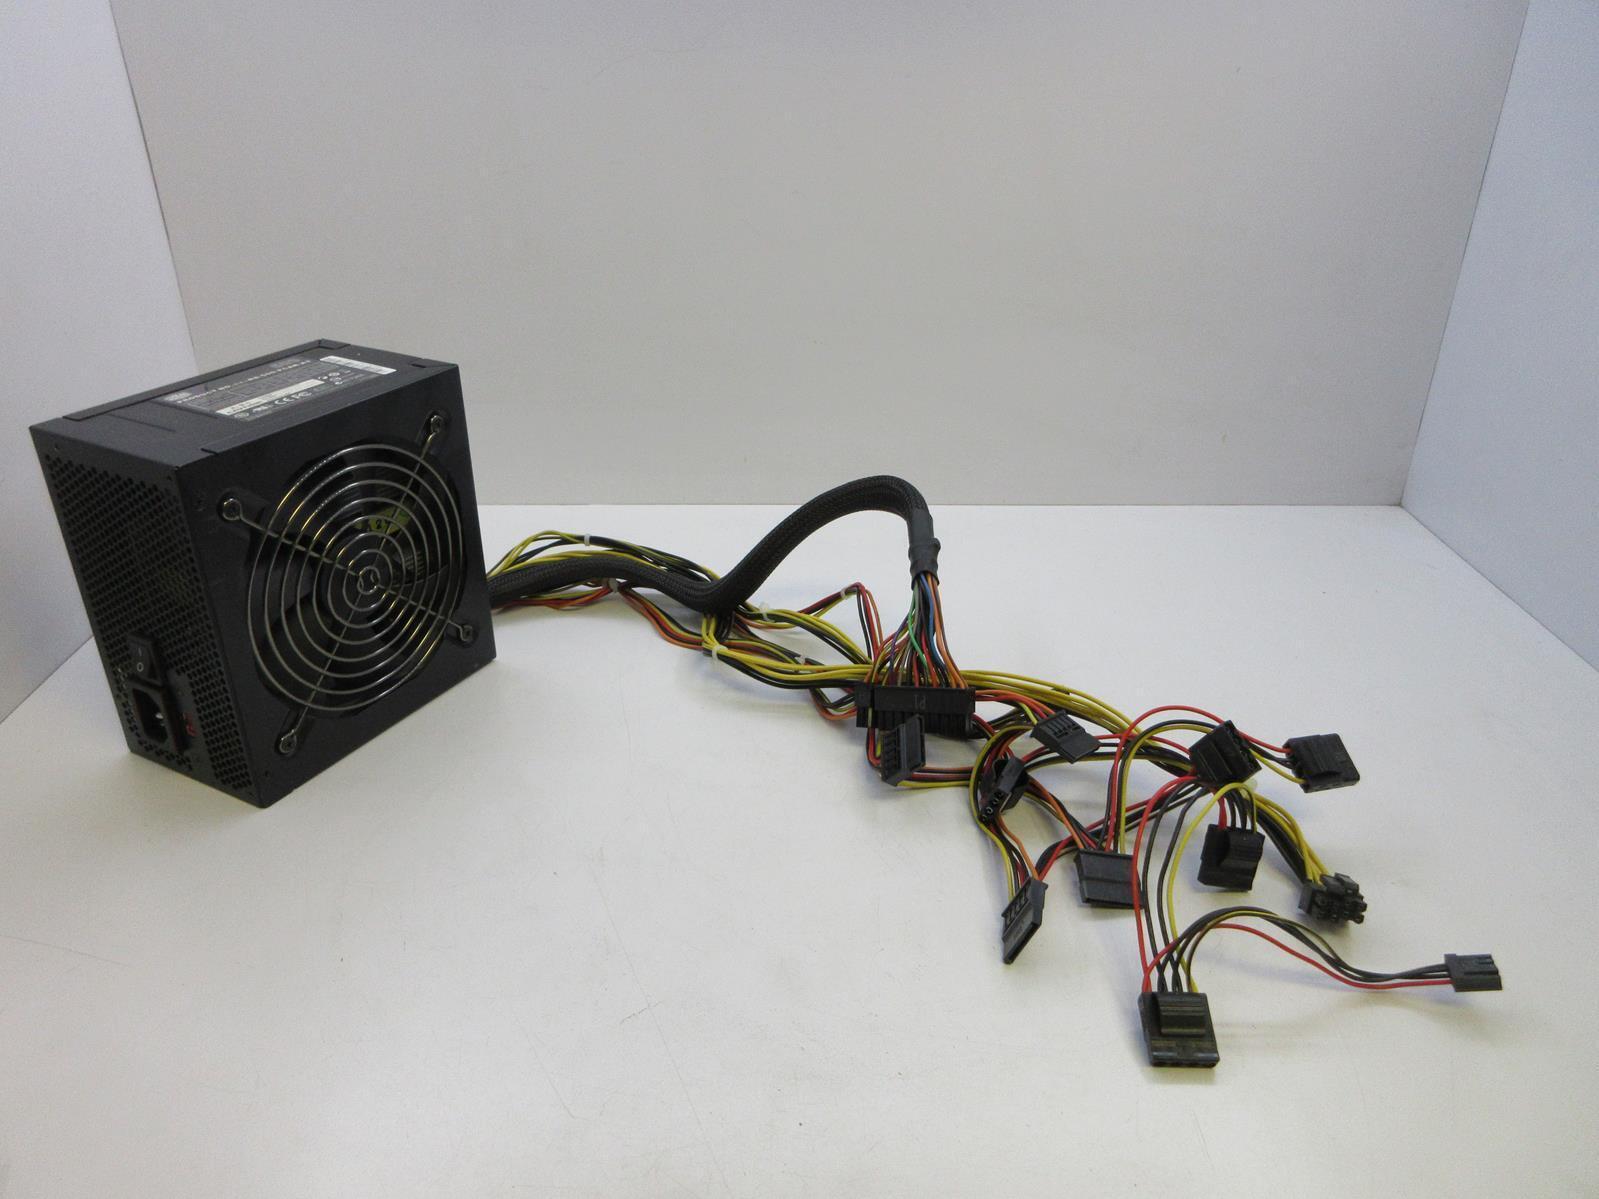 COOLER MASTER Power Supply 500W | RS-500-PCAR-A3